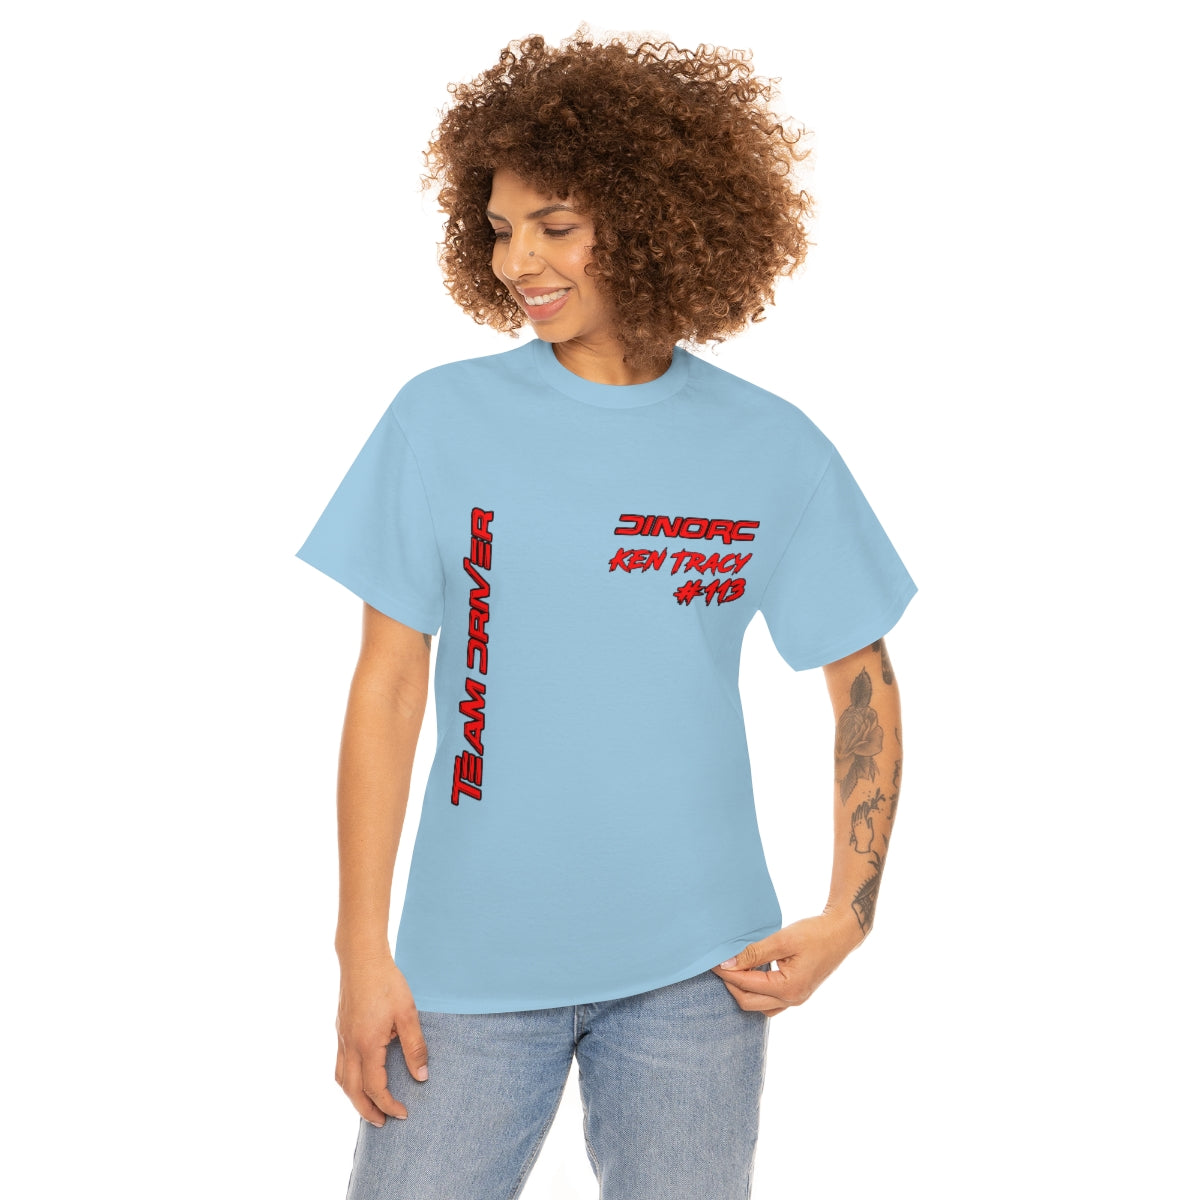 Team Driver Ken Tracy Front and Back DinoRc Logo T-Shirt S-5x 5 colors